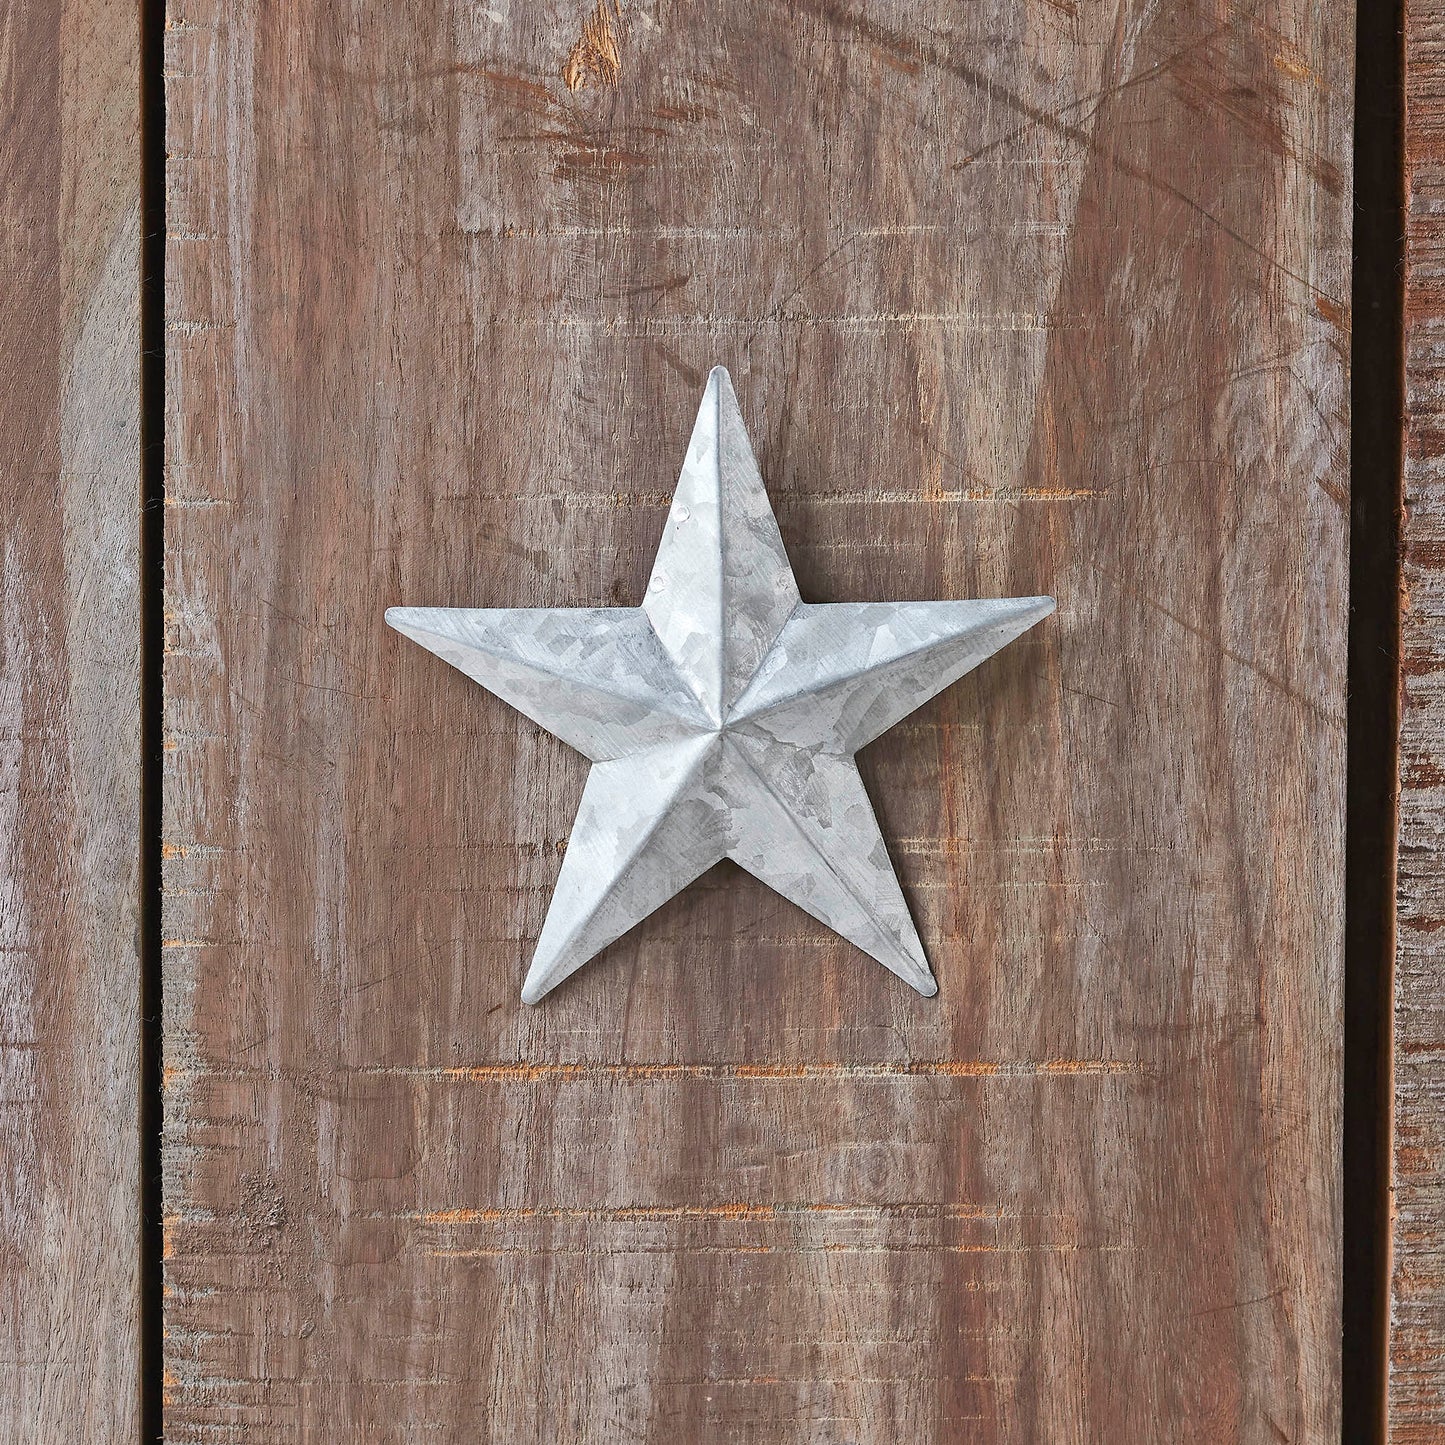 VHC Brands Patriotic Faceted Metal Star Galvanized Wall Hanging 4x4, Independence Day Decor, American Star Design, Distressed Appearance Metal Wall Hanging,  Star Shape, Country, Metal Grey